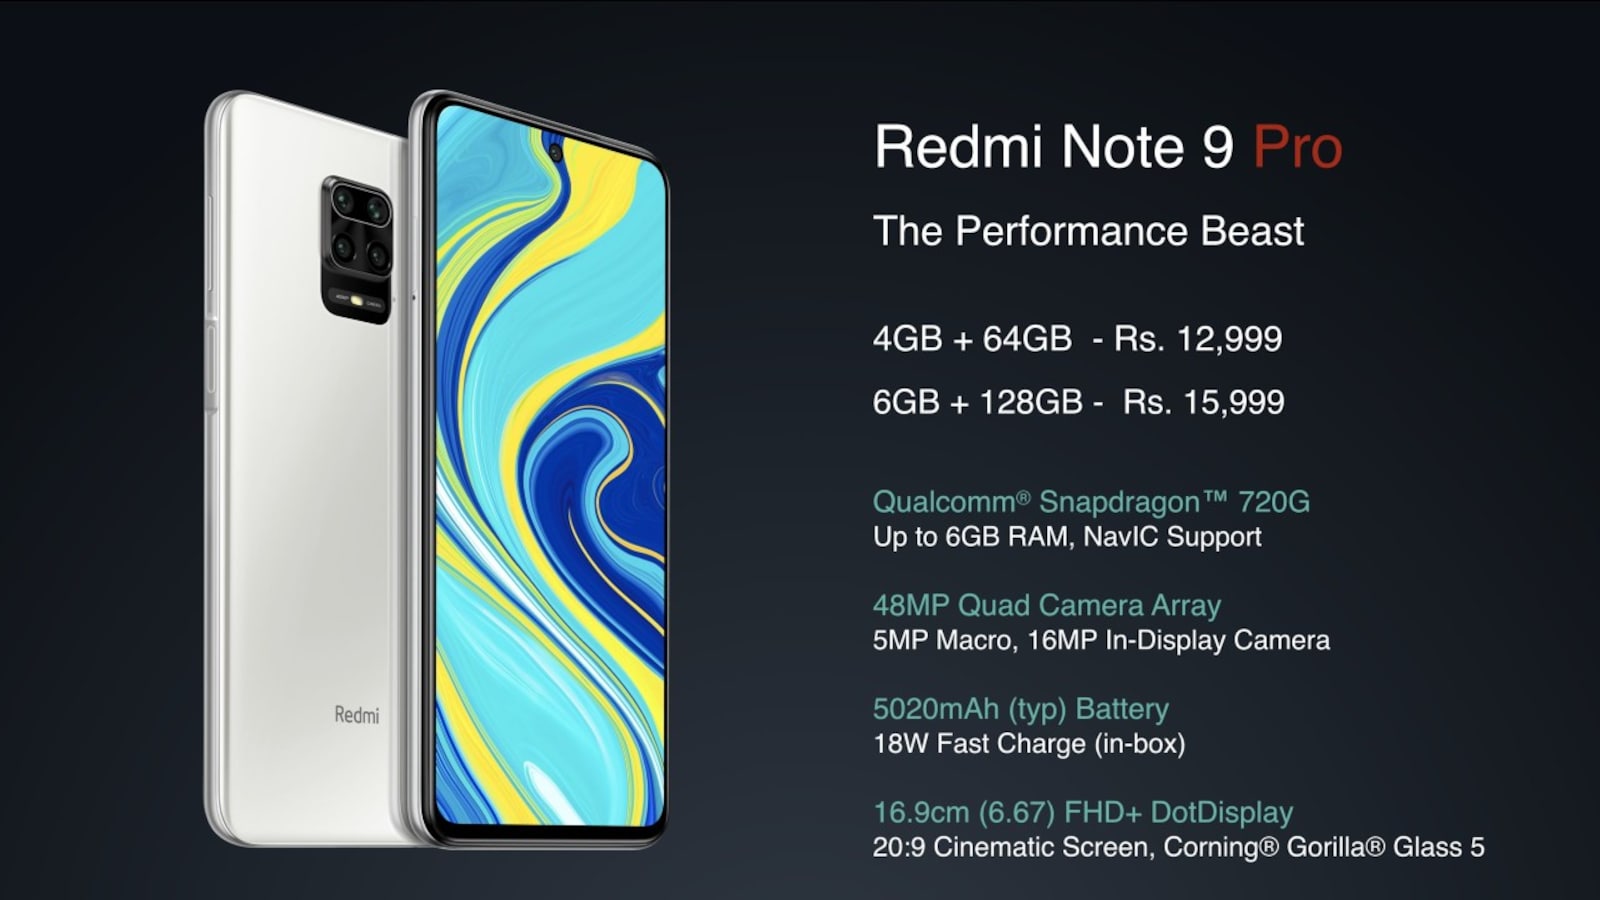 Redmi Note 9 Pro @₹12,999 - The Performance Beast